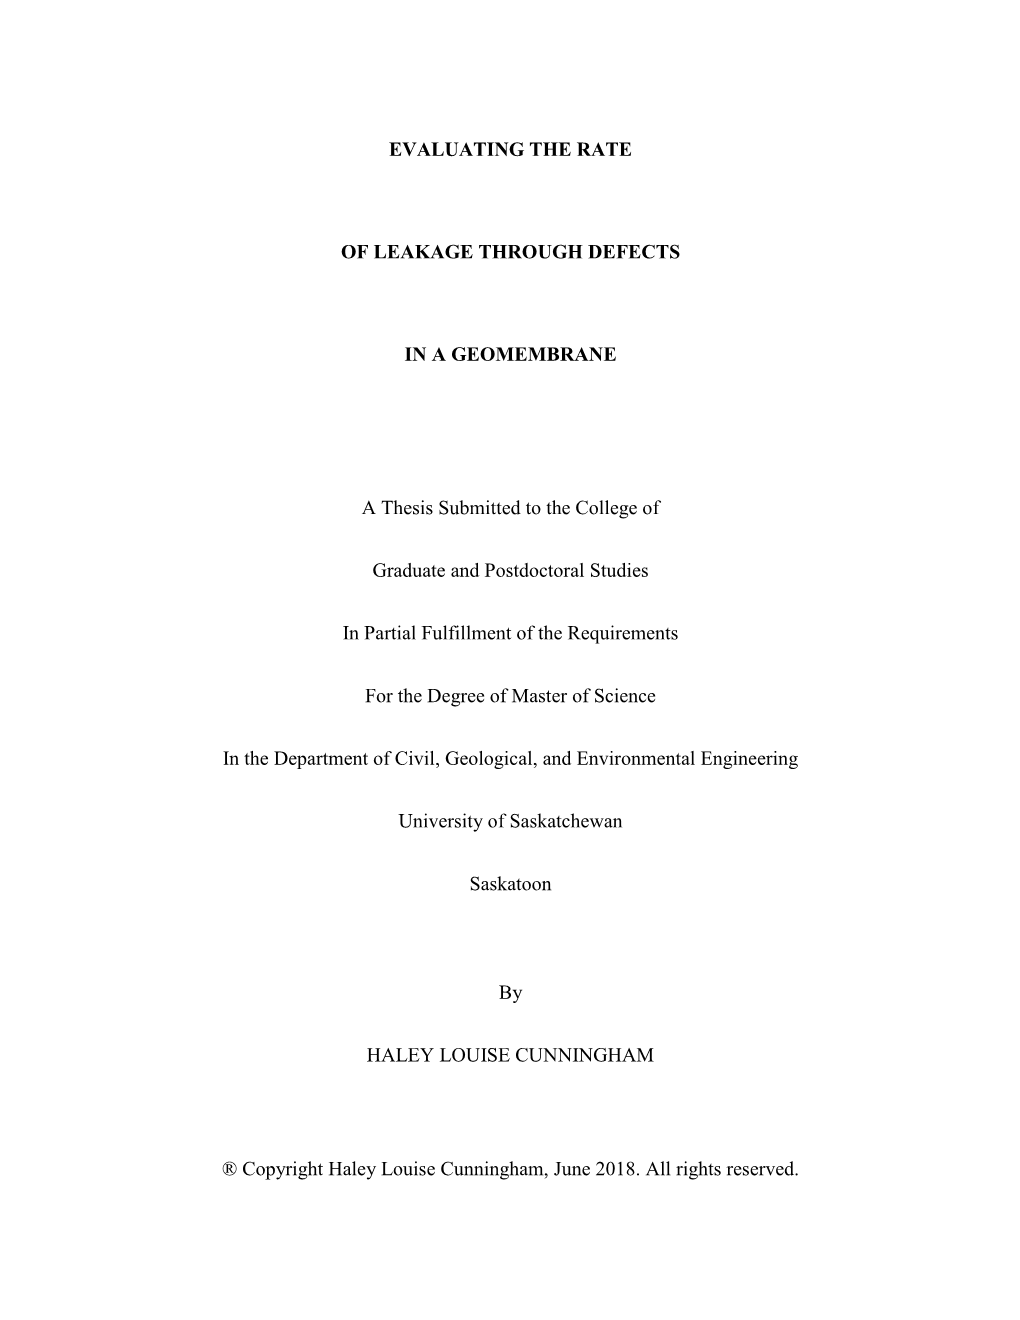 EVALUATING the RATE of LEAKAGE THROUGH DEFECTS in a GEOMEMBRANE a Thesis Submitted to the College of Graduate and Postdoctoral S